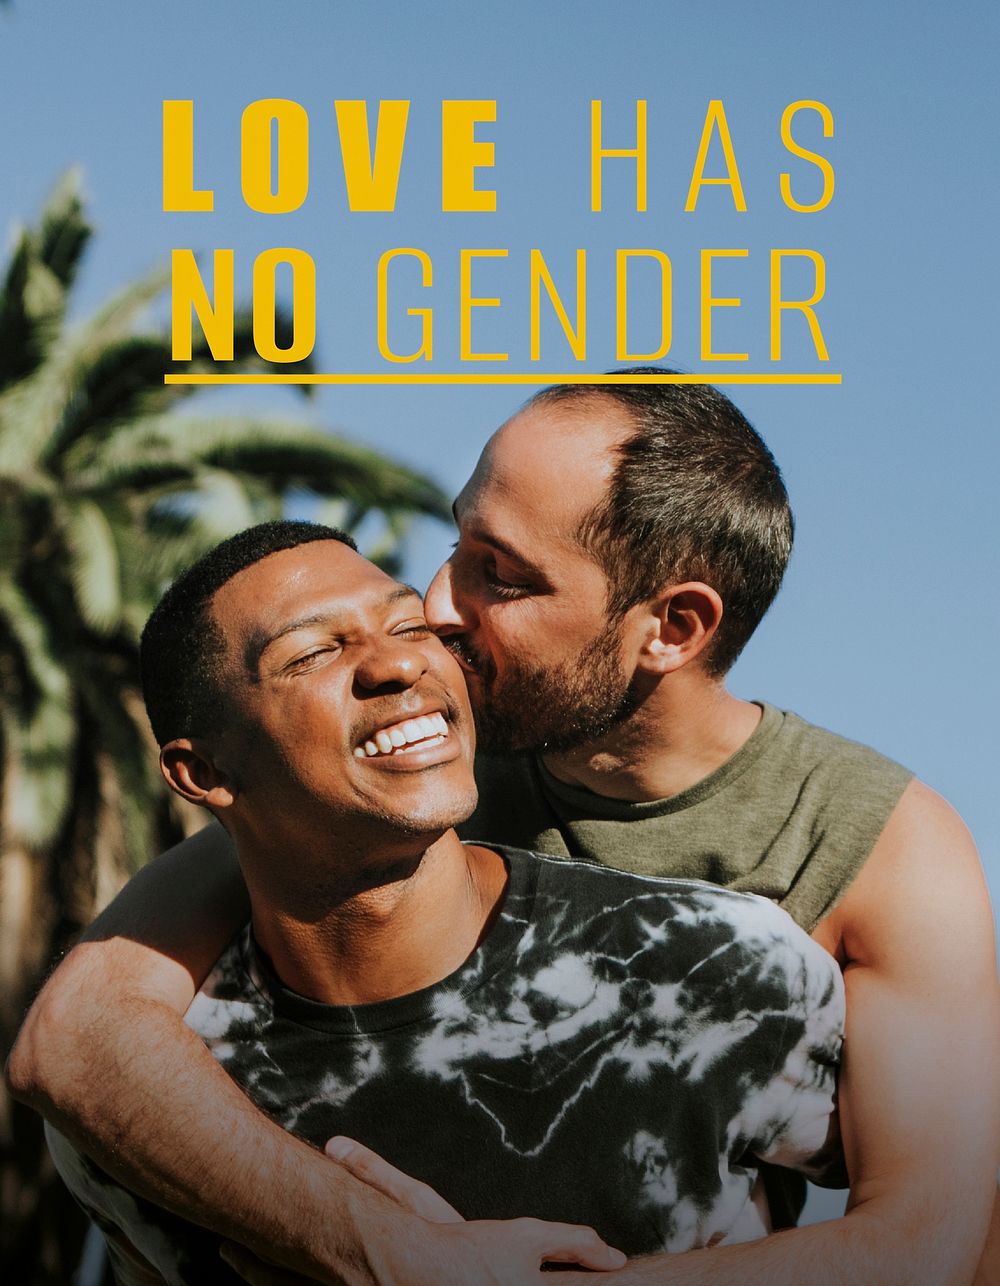 LGBTQ couple flyer template, love has no gender quote vector